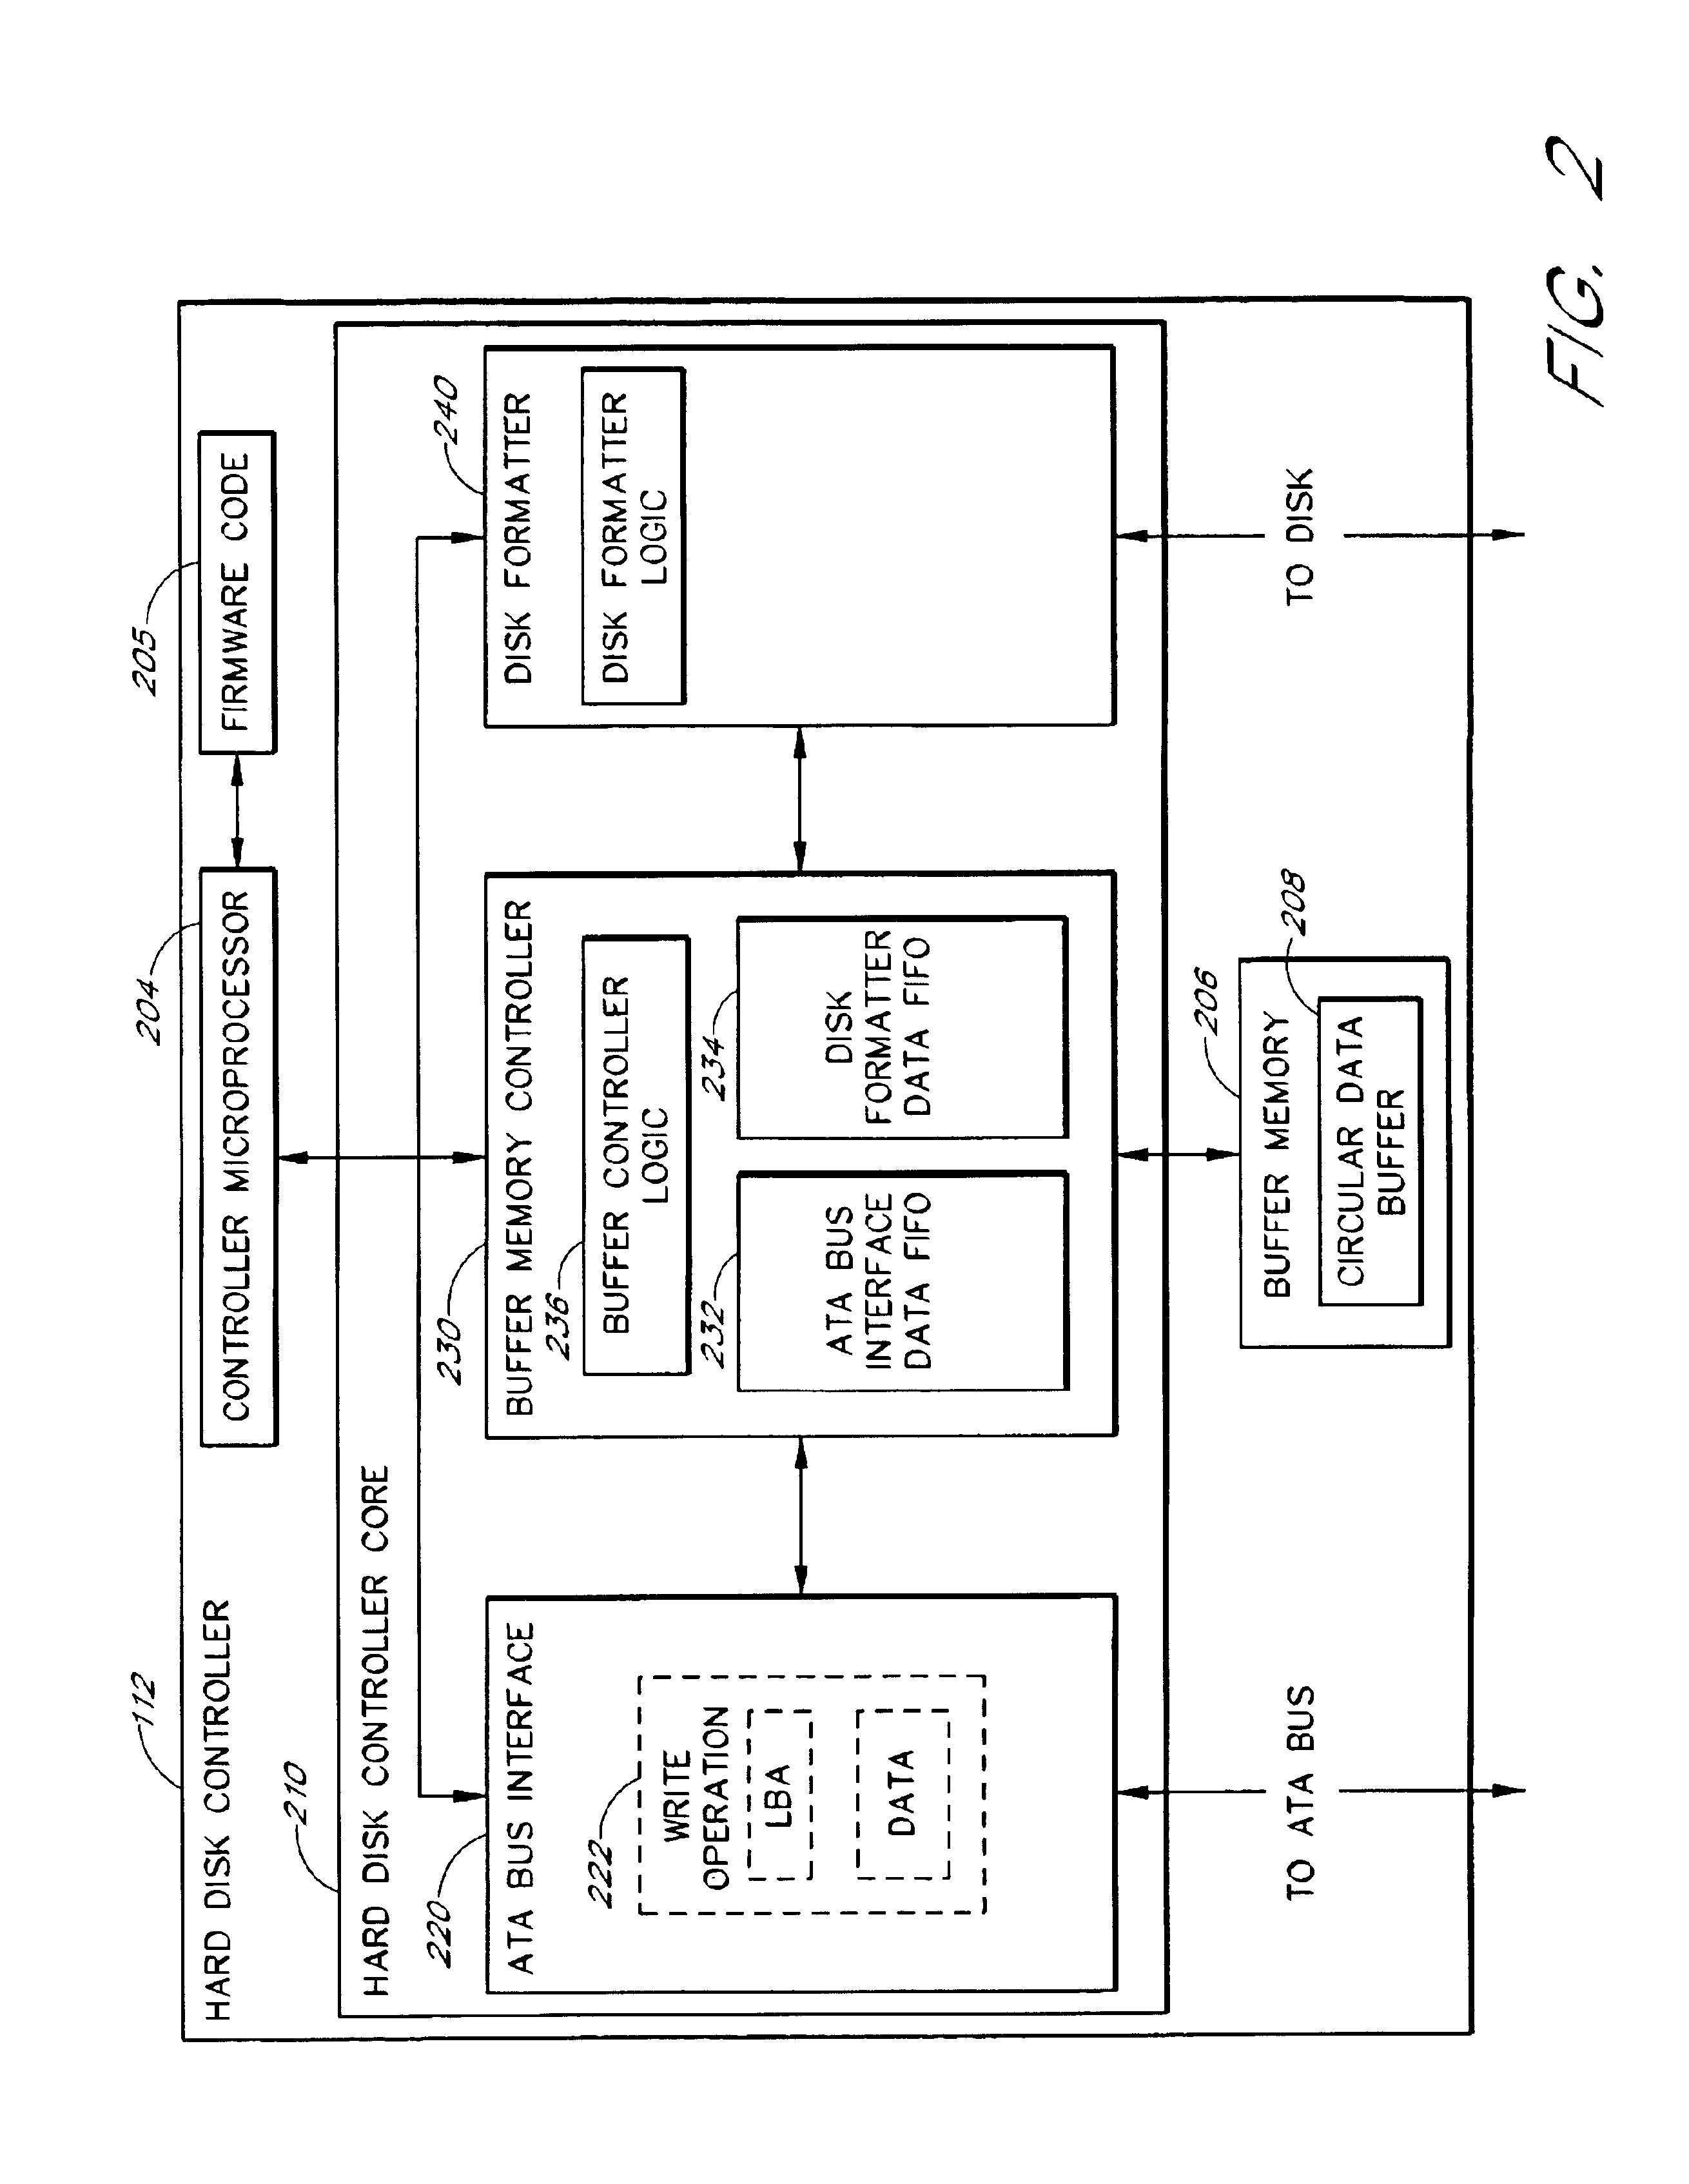 Disk controller configured to perform out of order execution of write operations